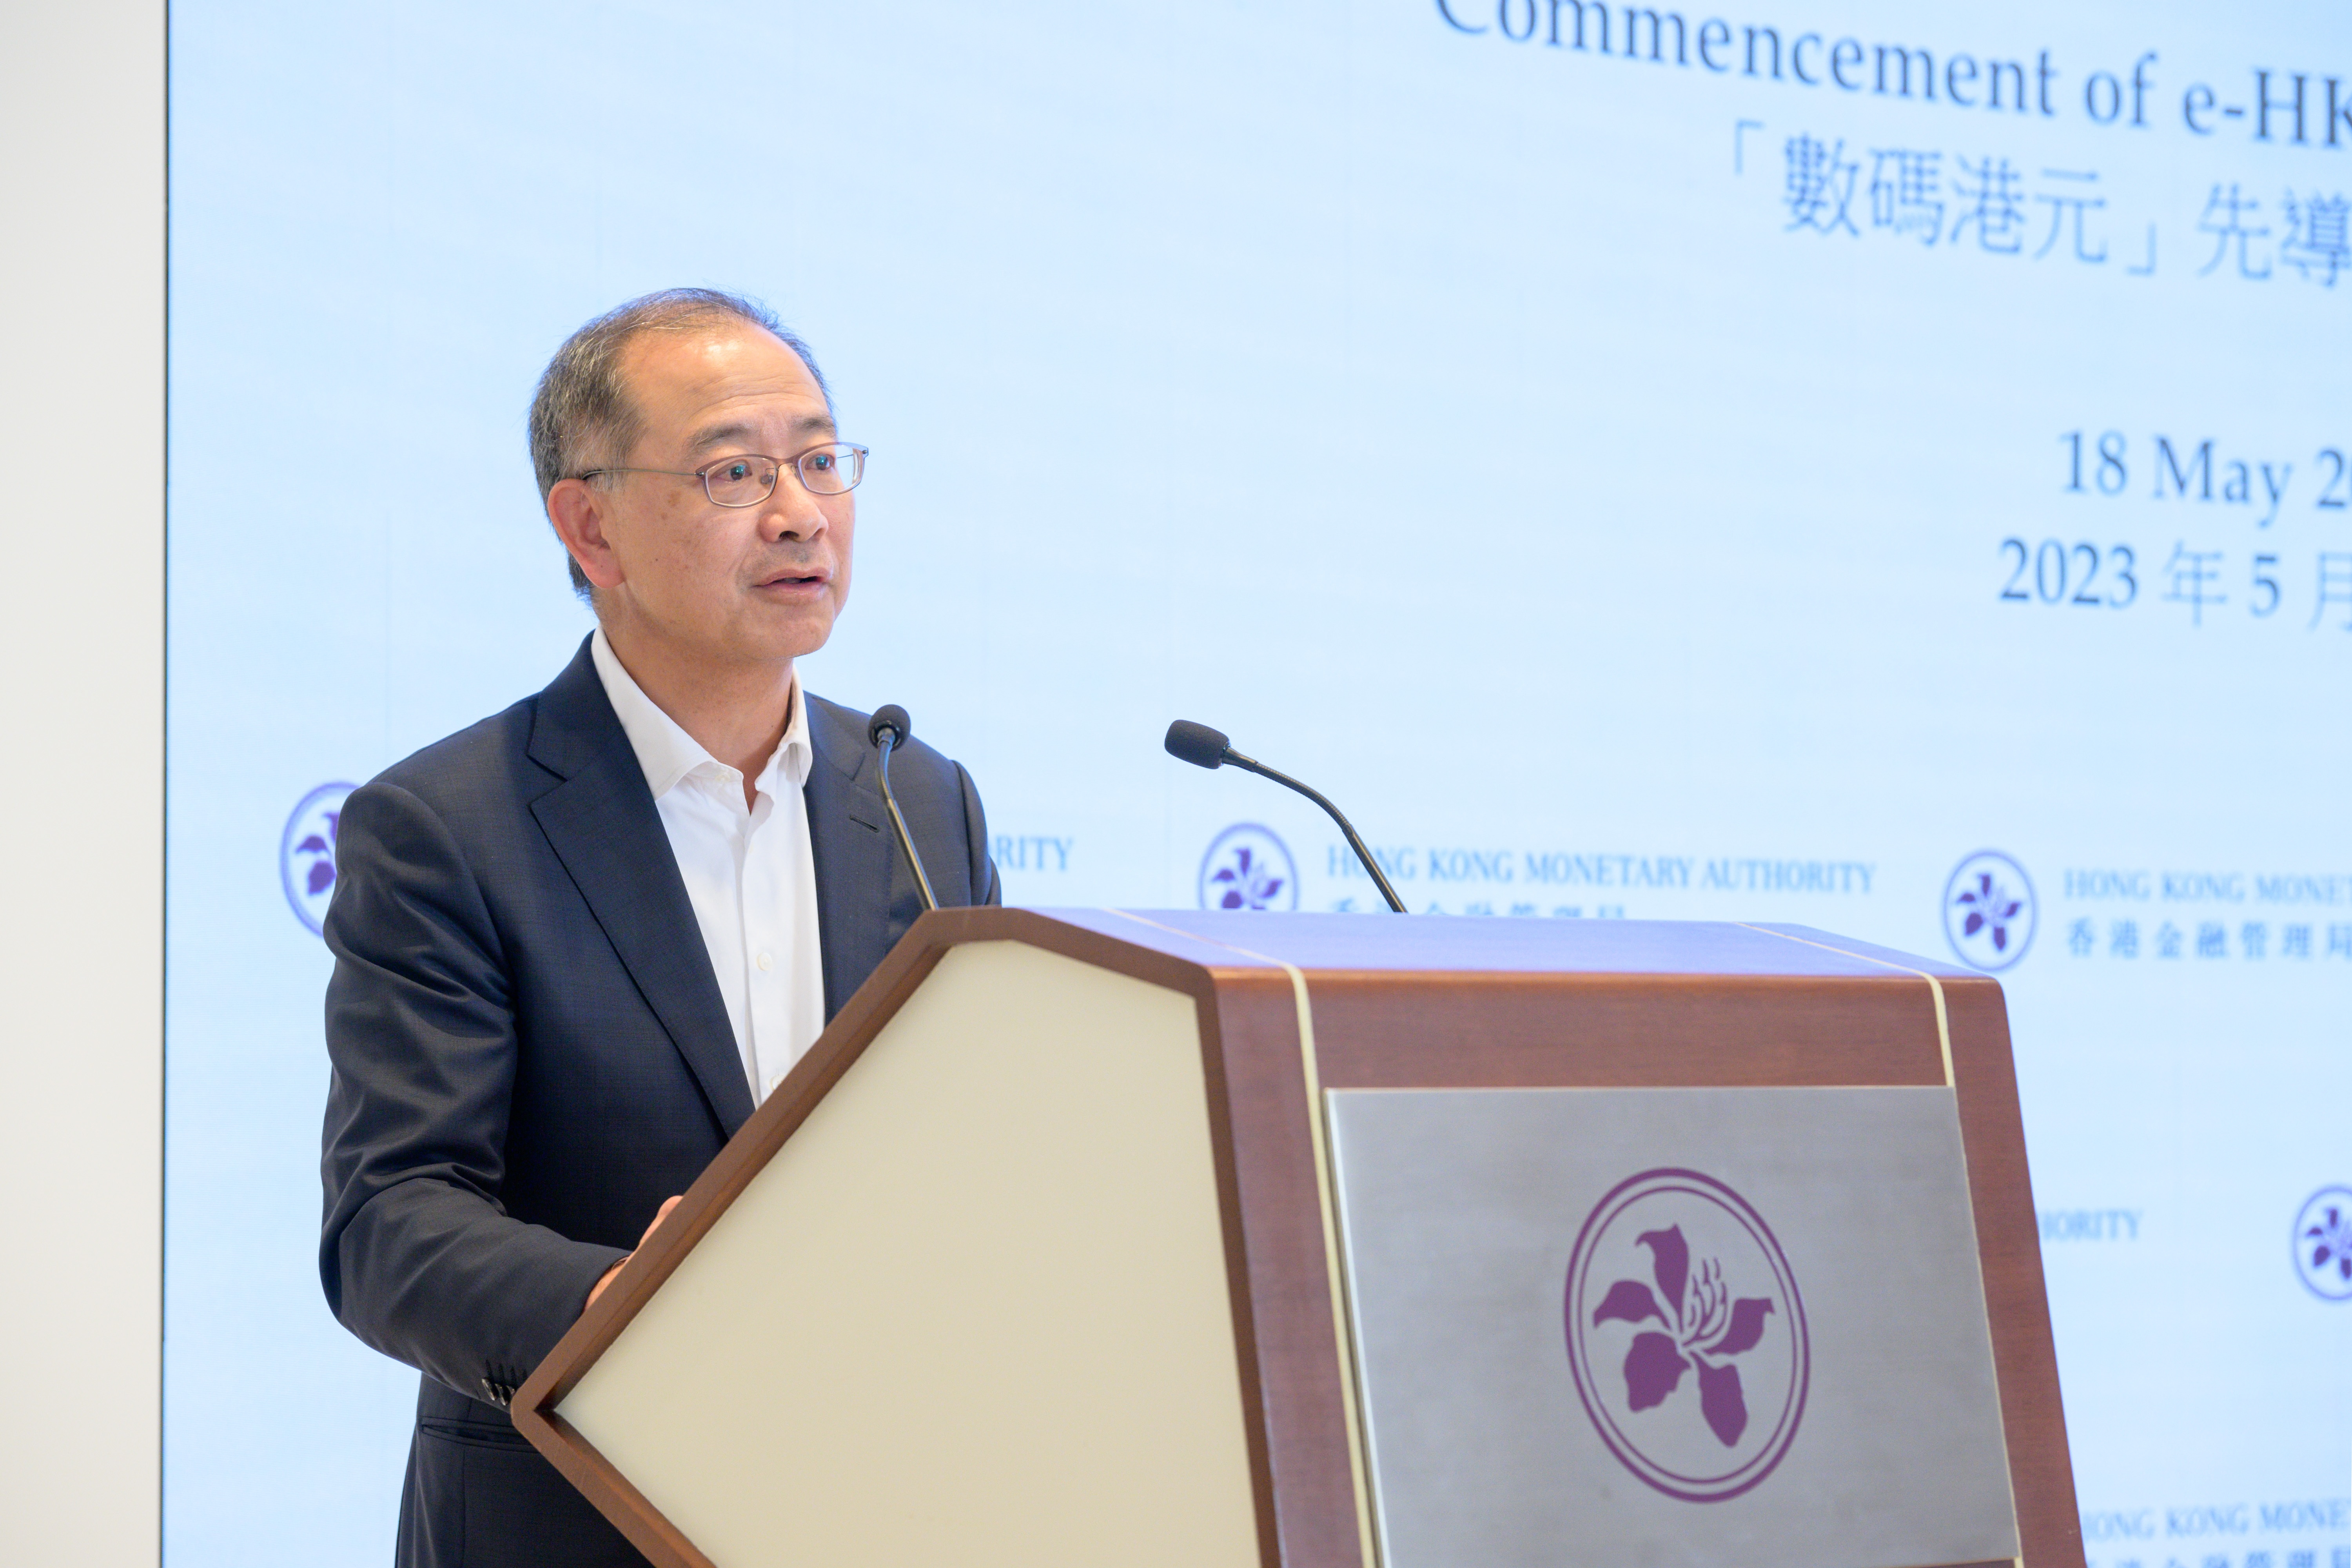 Mr Eddie Yue, the Chief Executive of the HKMA, gives opening remarks at the commencement event of the e-HKD Pilot Programme.